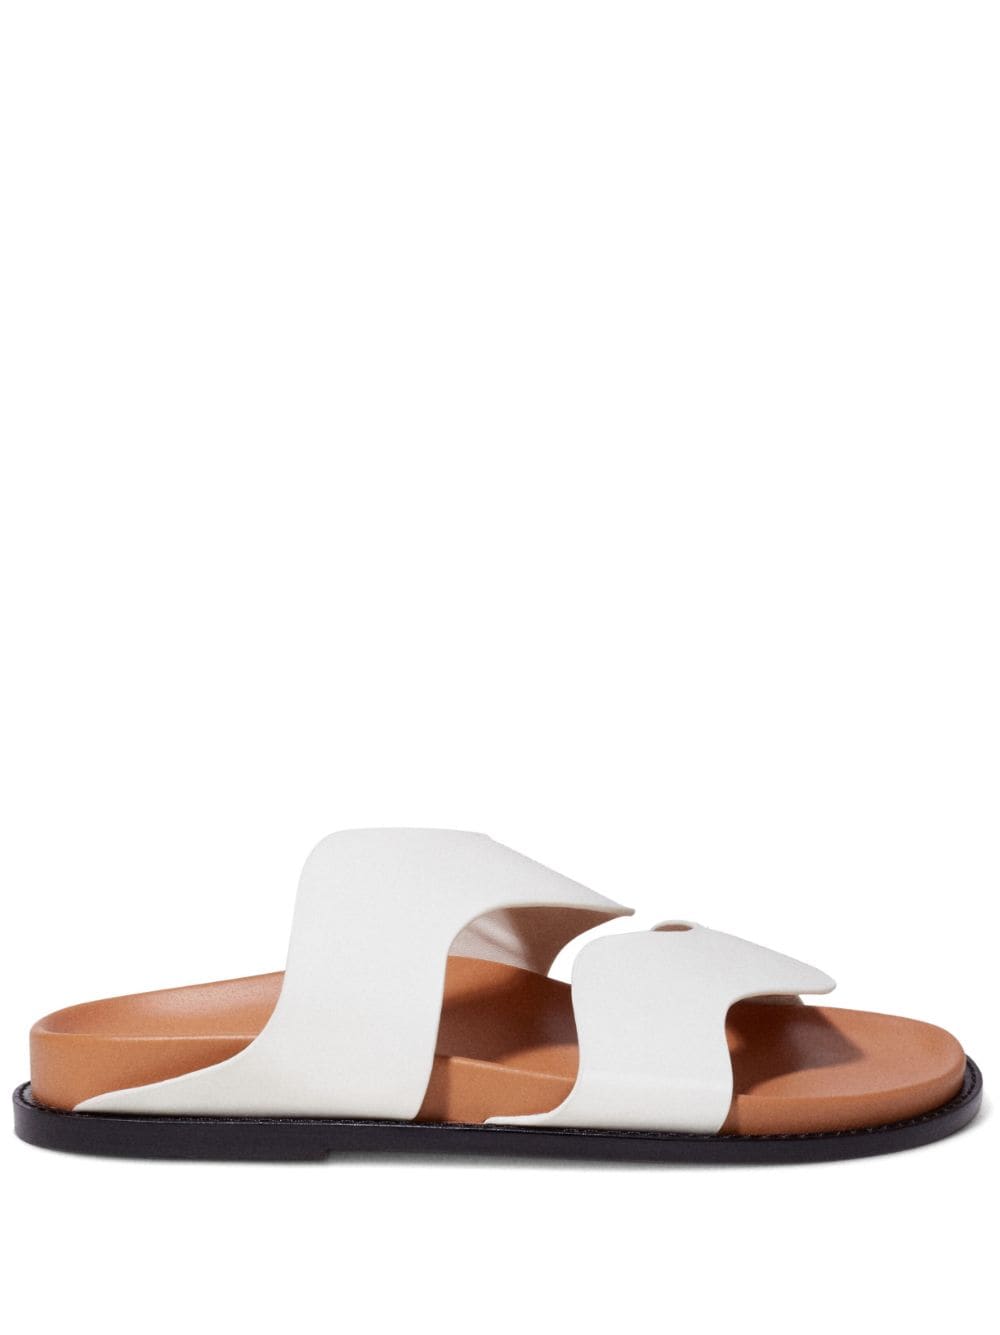 Simkhai Callen Leather Sandals In Ivory